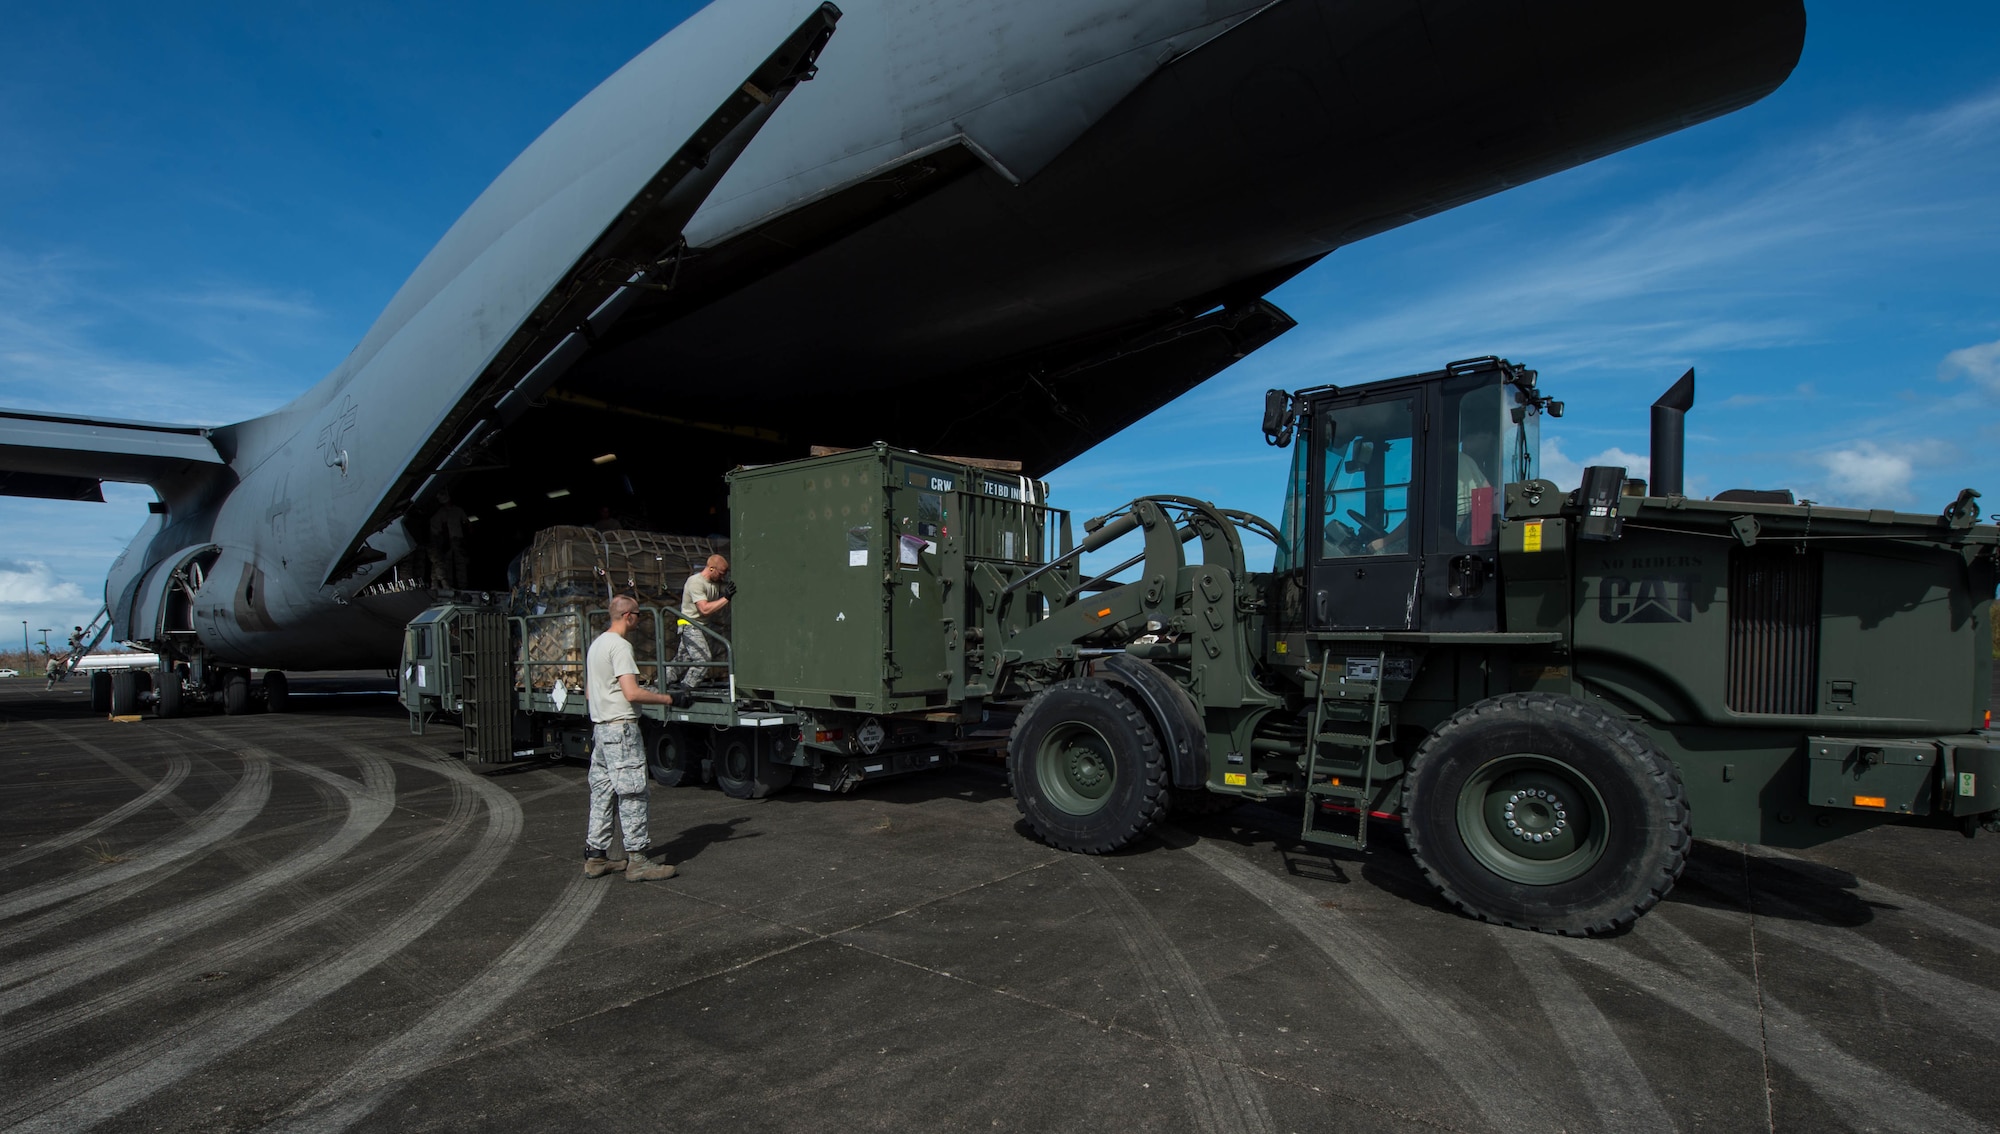 The 821st Contingency Response Group equipment is offloaded from a C-17 Globemaster lll from Travis Air Force Base Calif., at Roosevelt Roads, Puerto Rico, Sept. 26, 2017. A 70 member contingency response element from the 821st Contingency Response Group stationed at Travis Air Force Base, Calif., deployed to Puerto Rico in support of Hurricane Maria relief efforts. (U.S. Air Force photo by Staff Sgt. Robert Hicks)